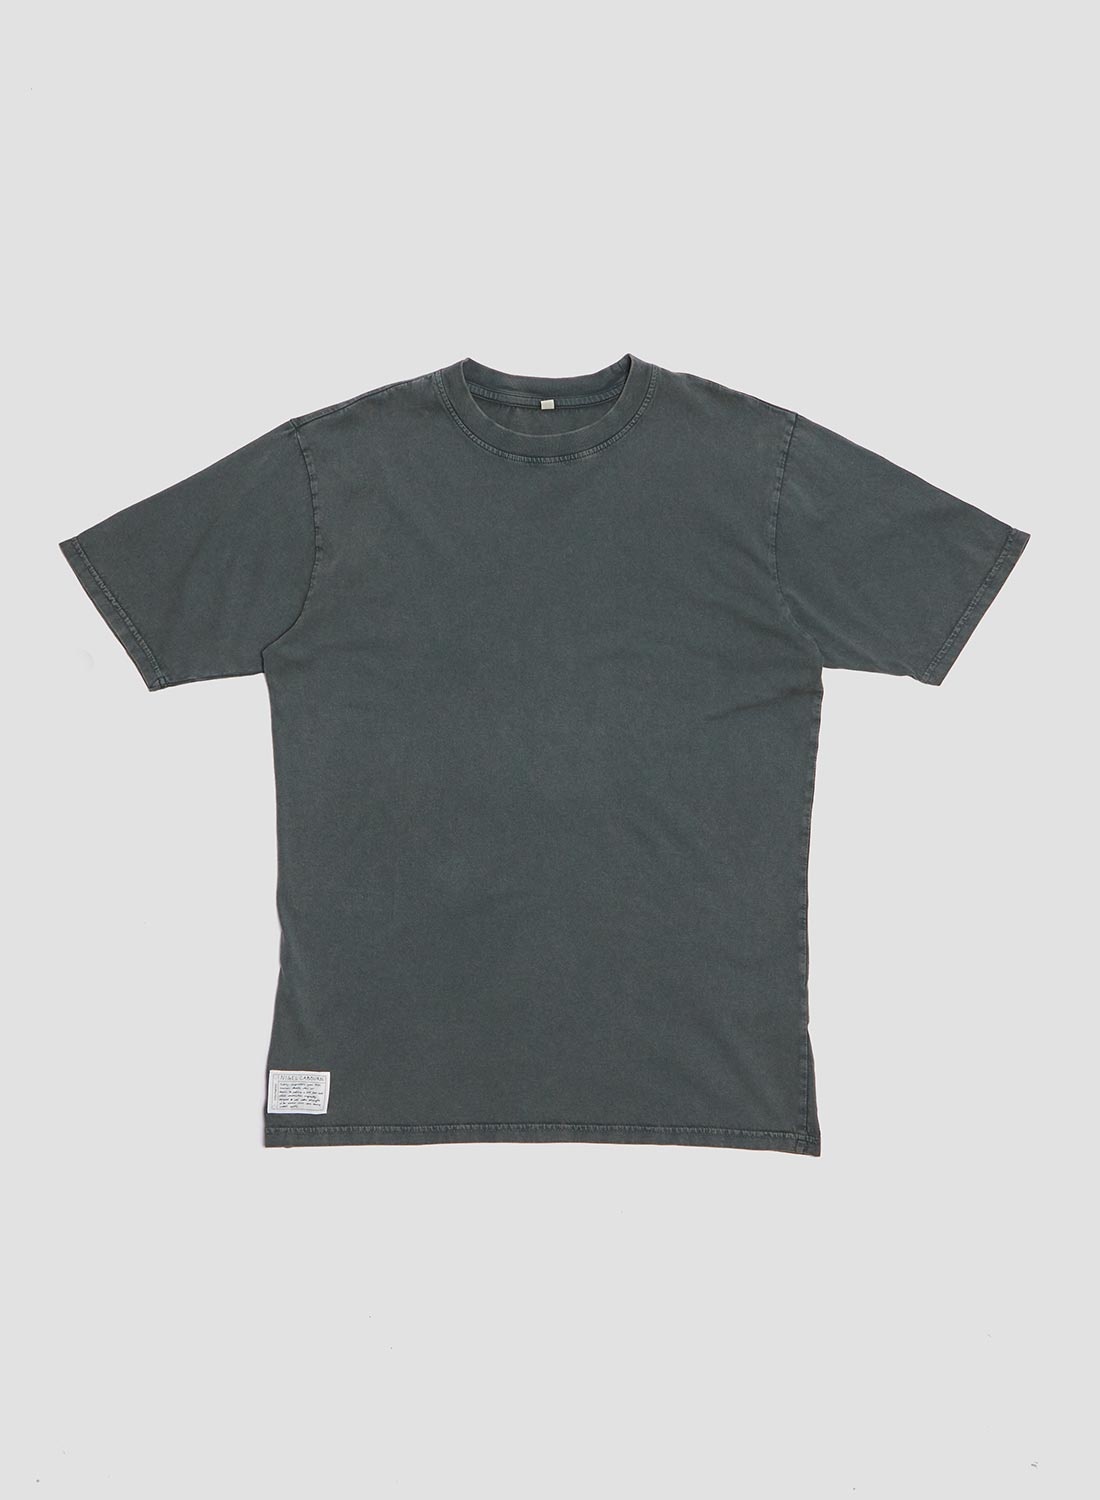 Classic Relaxed Fit Tee in Stone Wash Green - 1